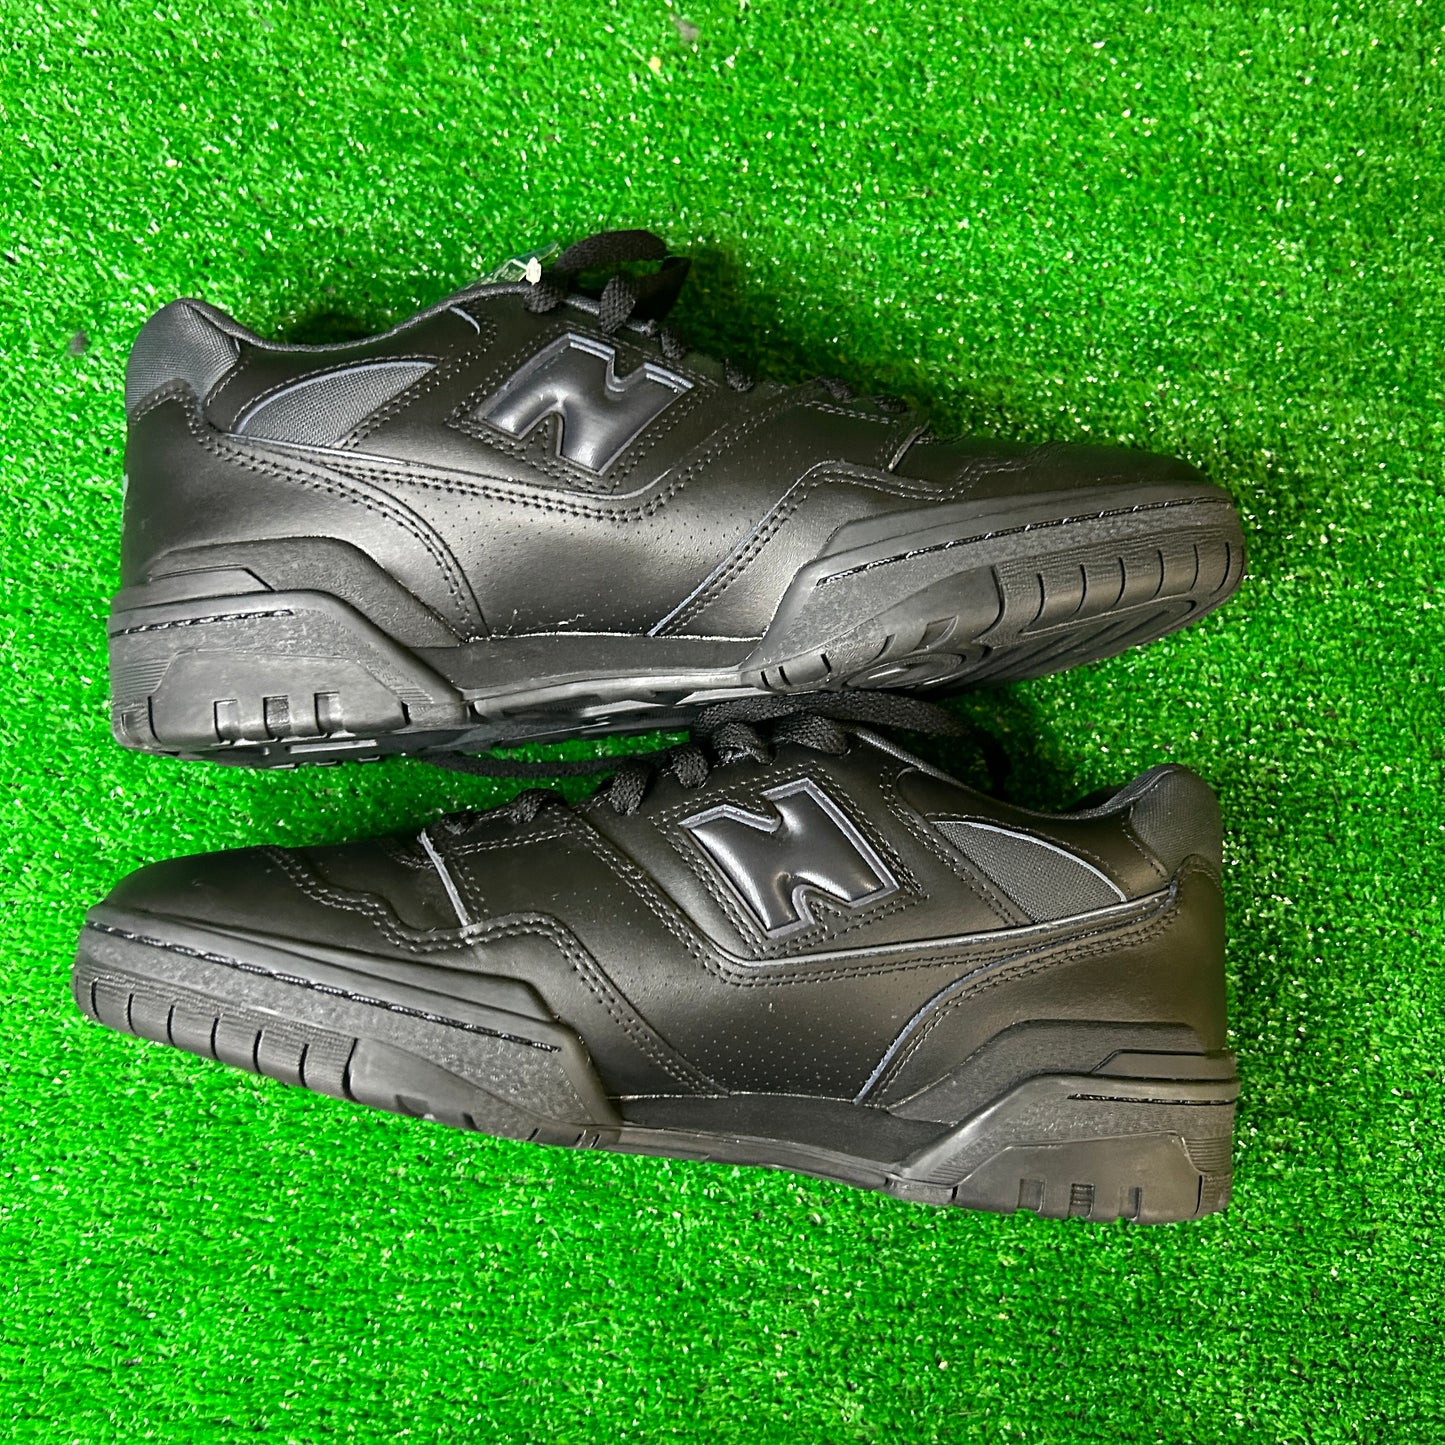 New Balance 550 Triple Black (Pre-Owned)